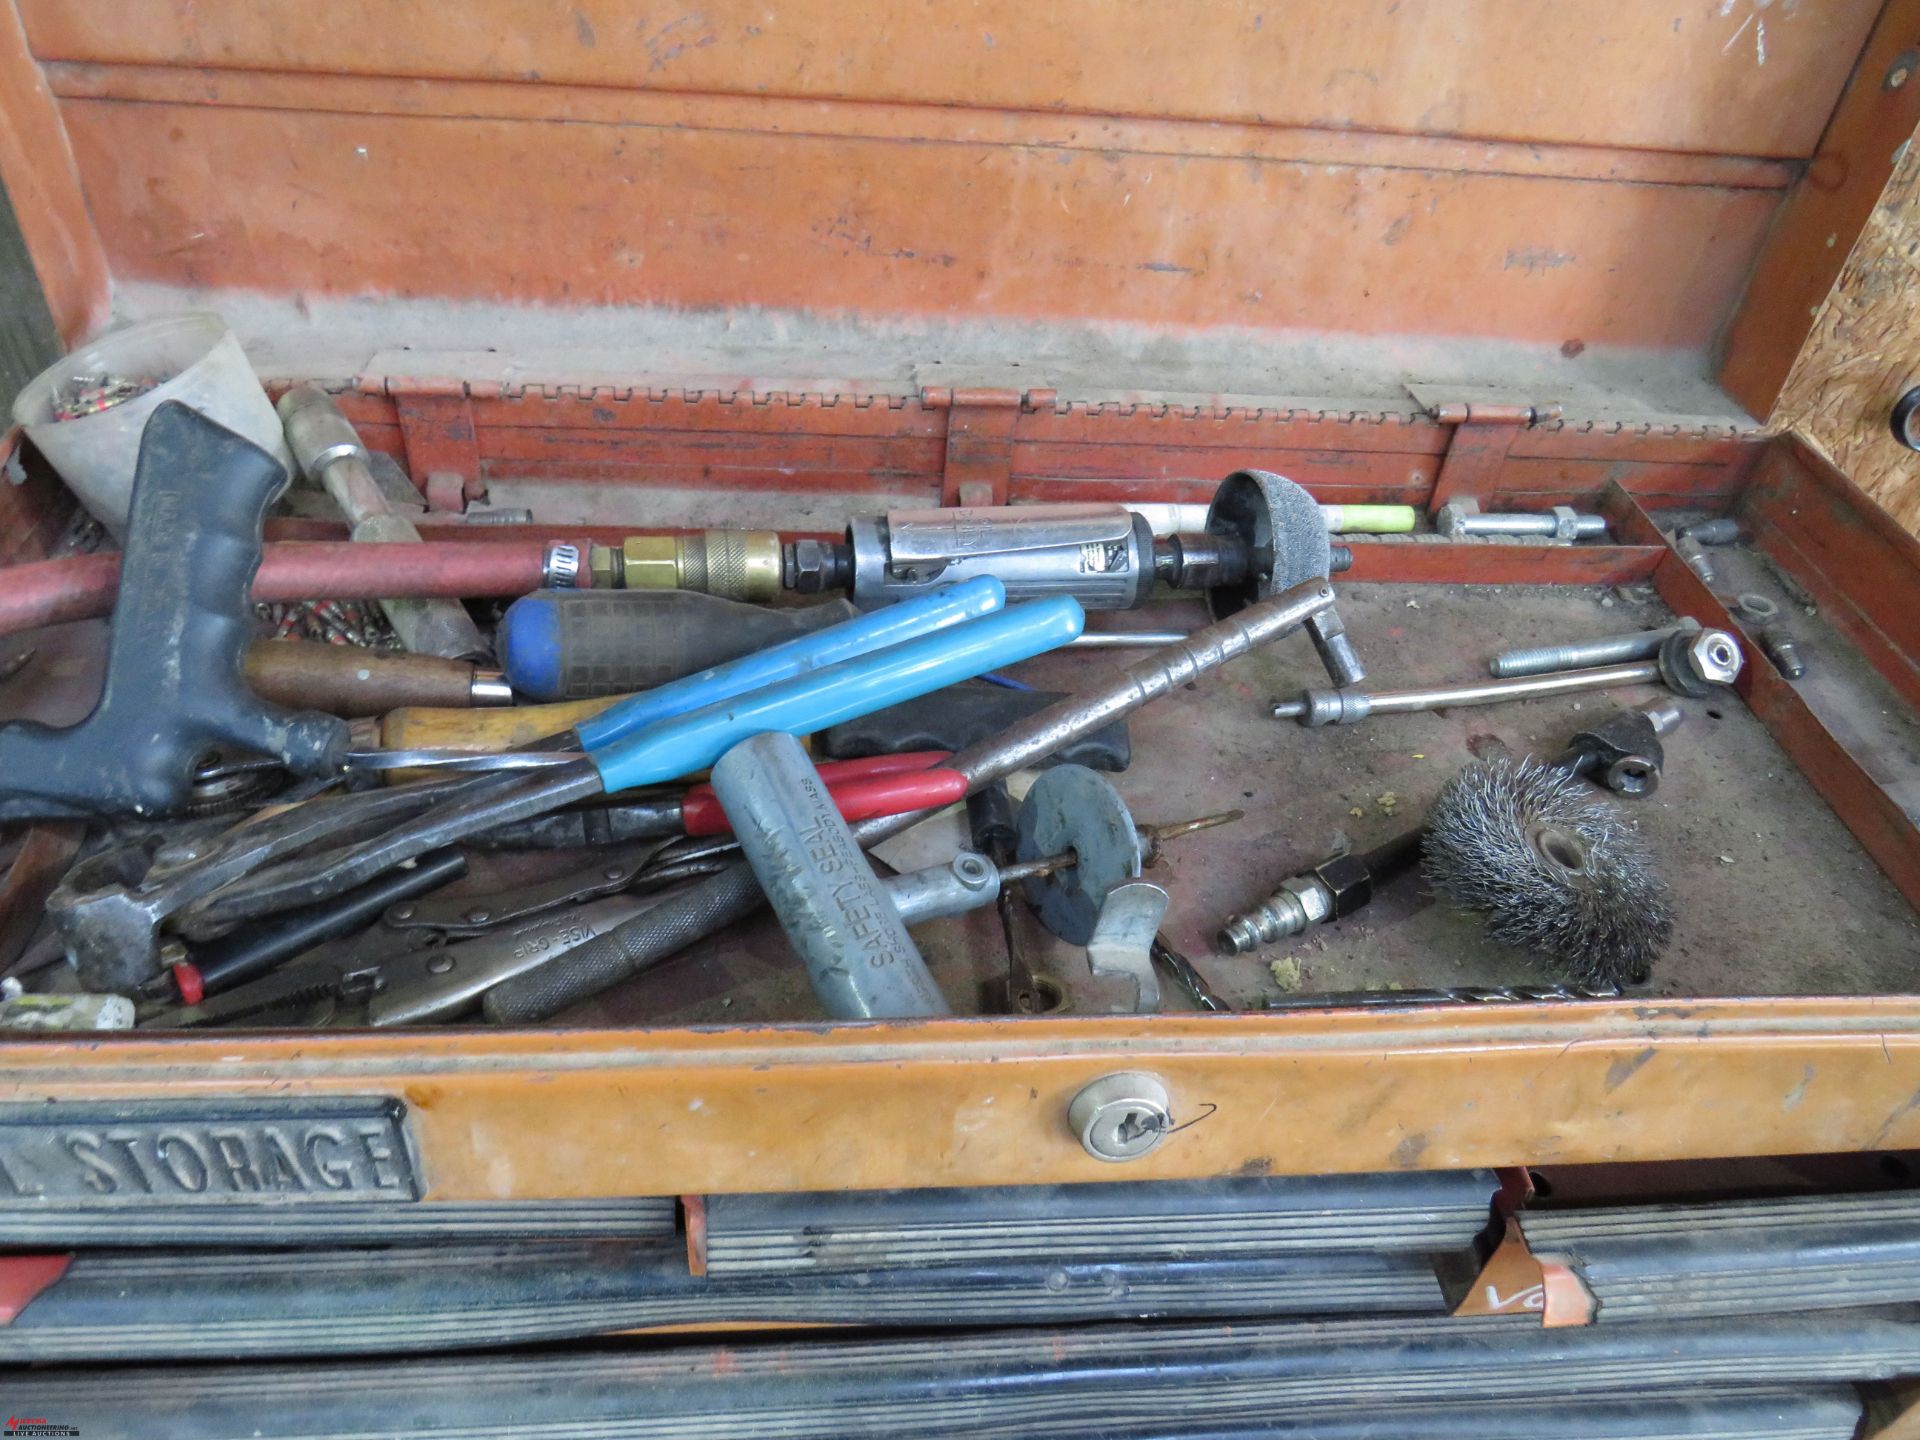 NAPA ROLLING TOOL CHEST WITH TOP CABINET, WITH ASSORTED TIRE TOOLS/SUPPLIES, TO INCLUDE CABINET - Image 2 of 4